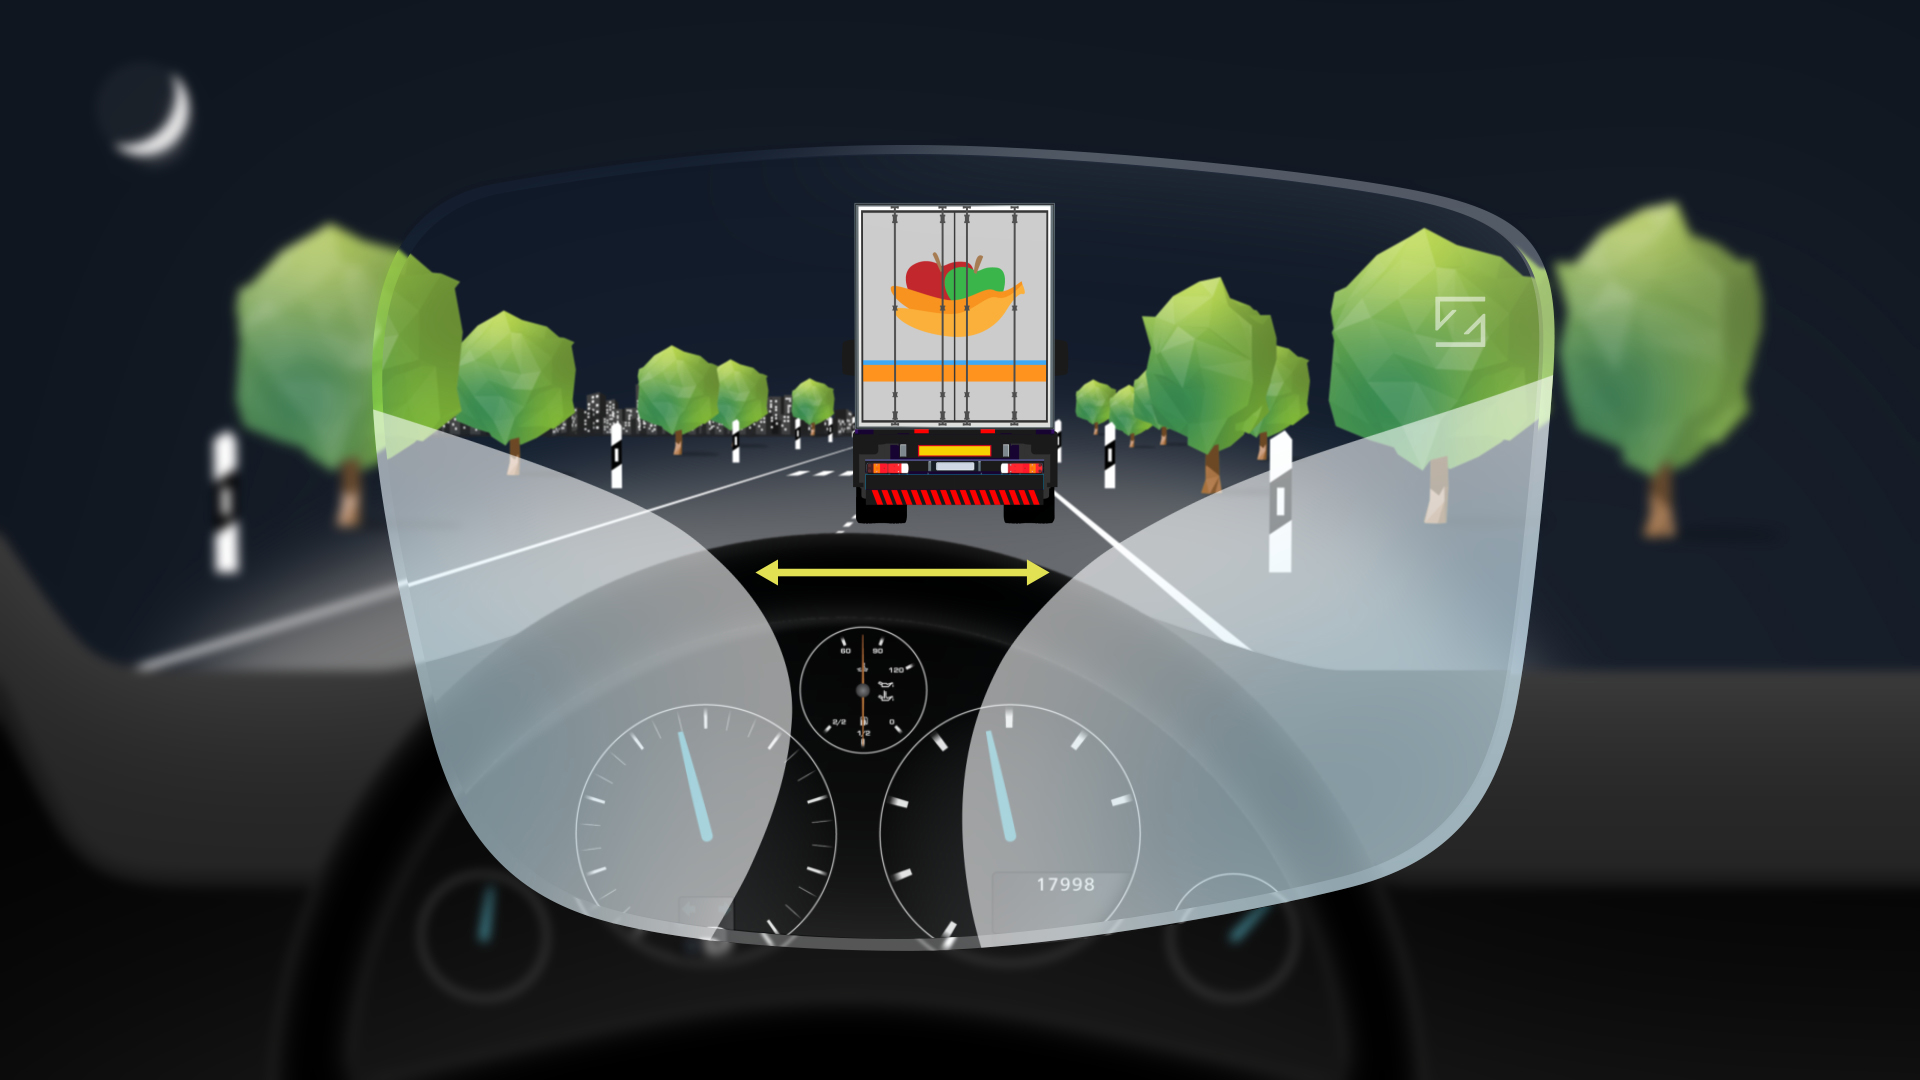 Up to 43% larger** mid-distance zone for easier focus switching between dashboard and mirrors. And up to 14% larger** far-distance vision zone for a wider view of the road.